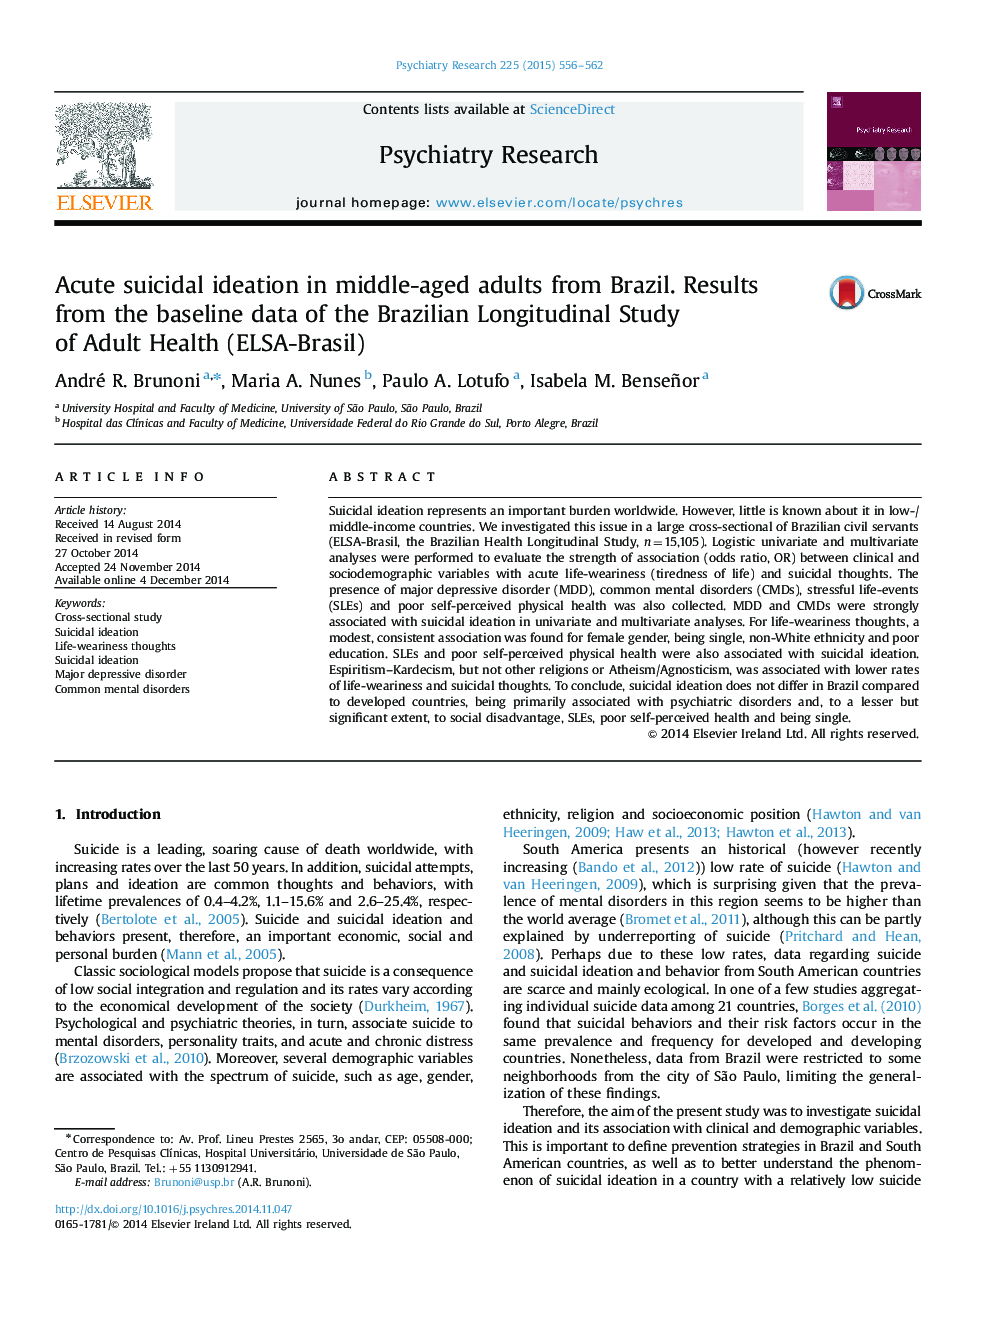 Acute suicidal ideation in middle-aged adults from Brazil. Results from the baseline data of the Brazilian Longitudinal Study of Adult Health (ELSA-Brasil)